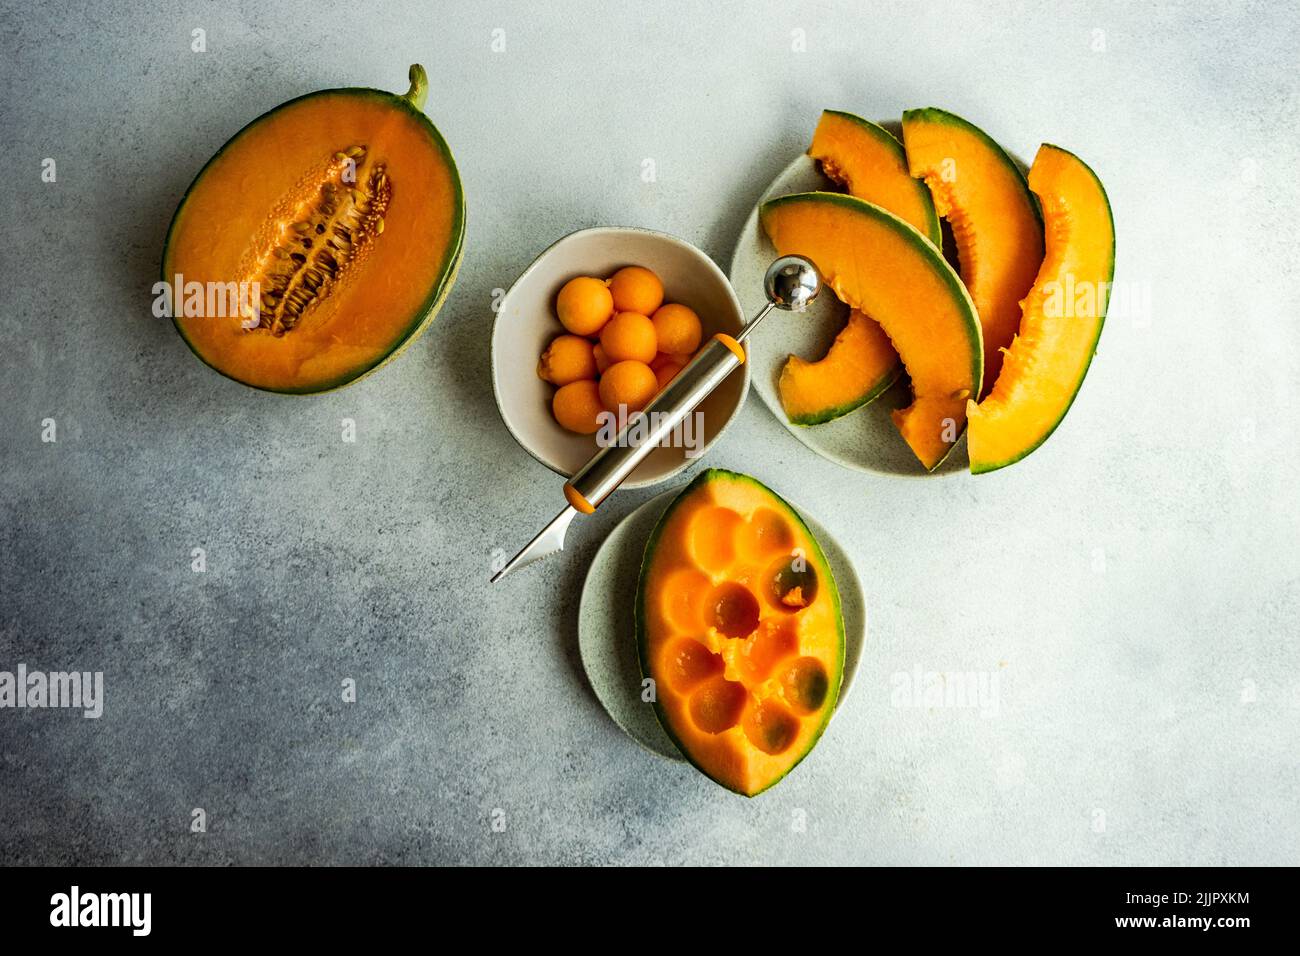 Overhead view of slices of cantaloupe melon and melon balls on a table Stock Photo